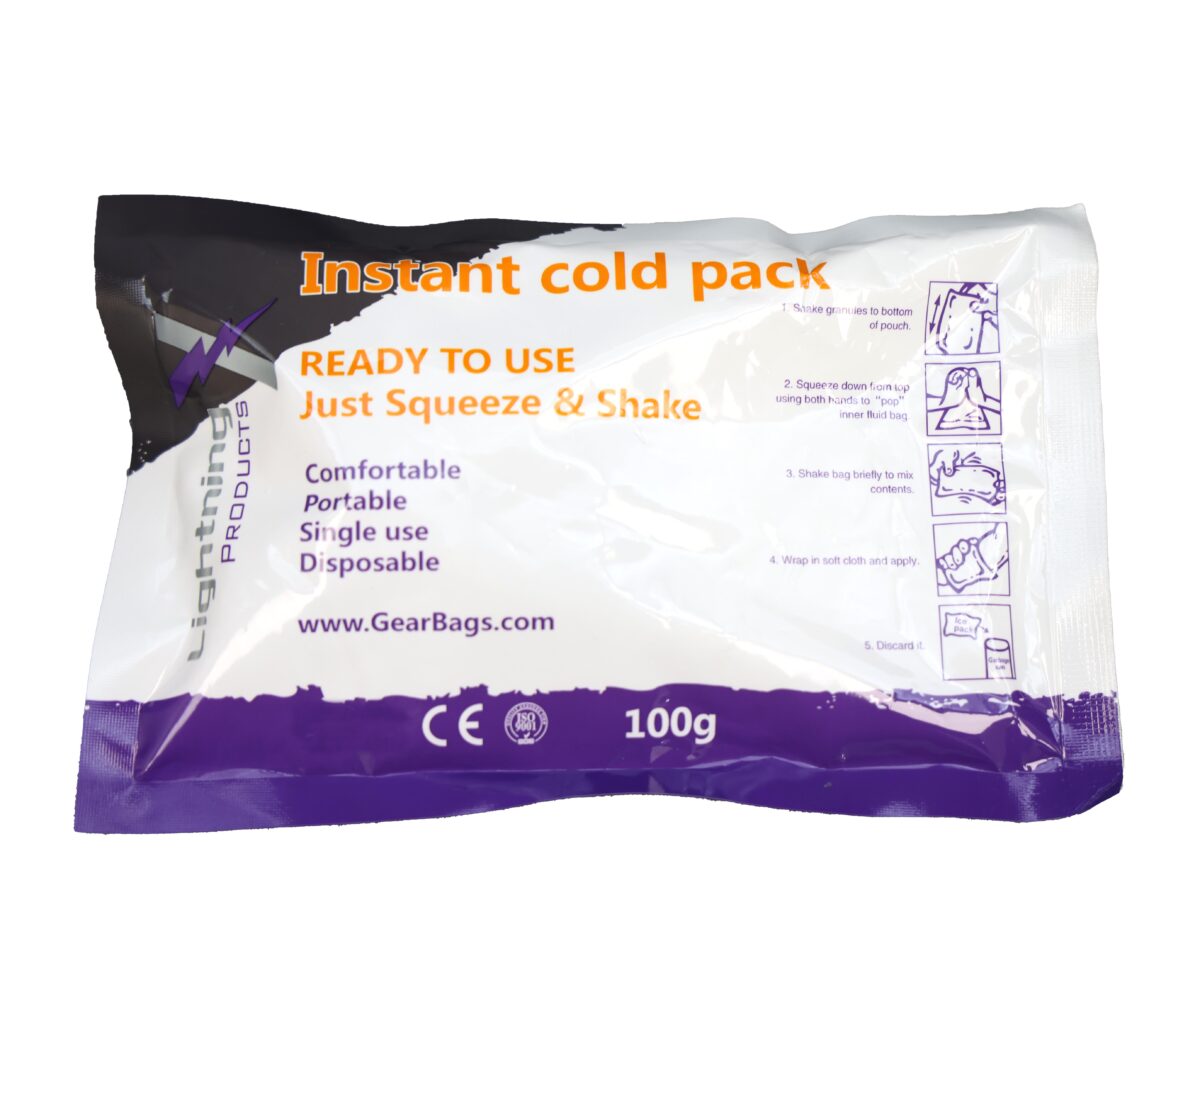 lightning x instant ice cold compress pack 4.5" x 7" for sprains, strains, bumps and other injuries, must have for first aid kits